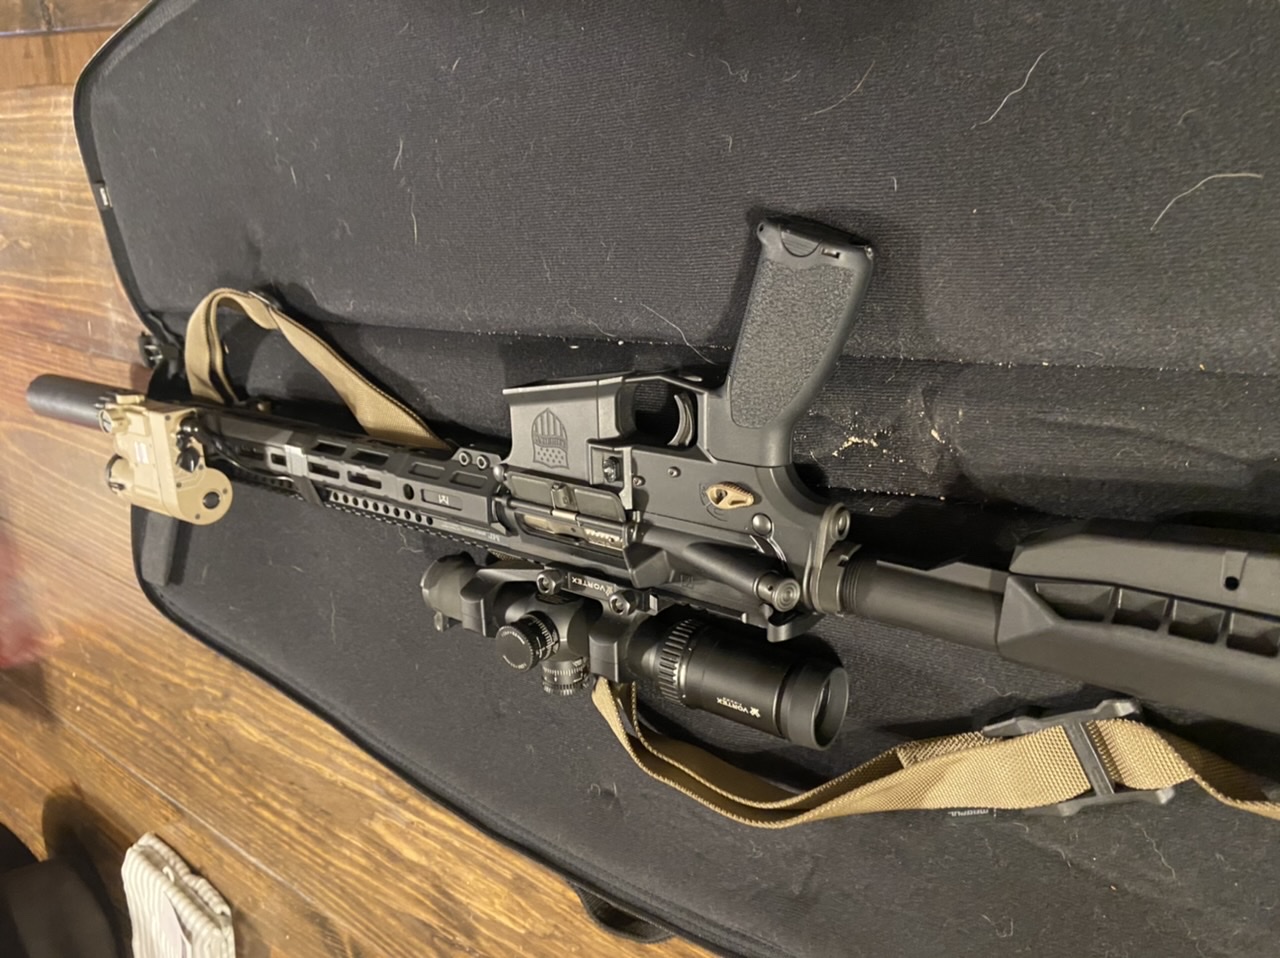 Rifle set up with DBAL D2 and LPVO | Sniper's Hide Forum